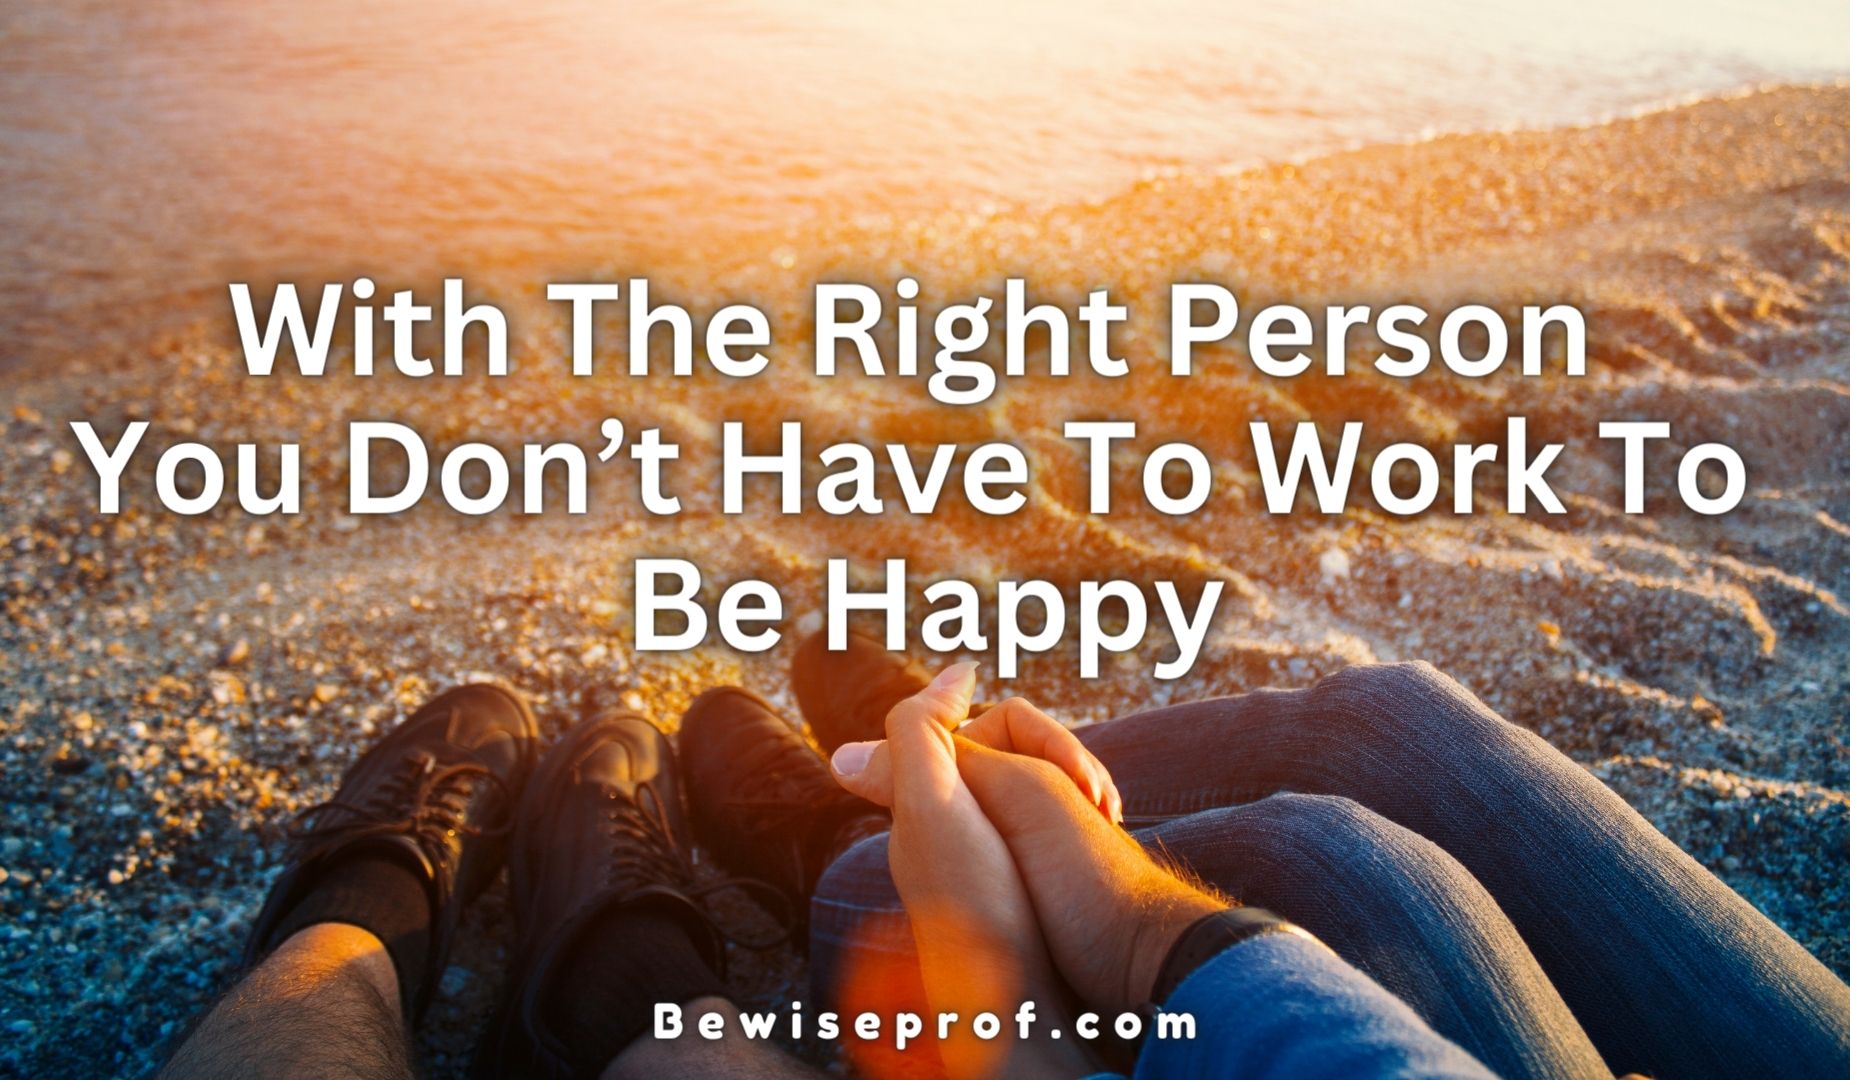 With The Right Person, You Don’t Have To Work To Be Happy